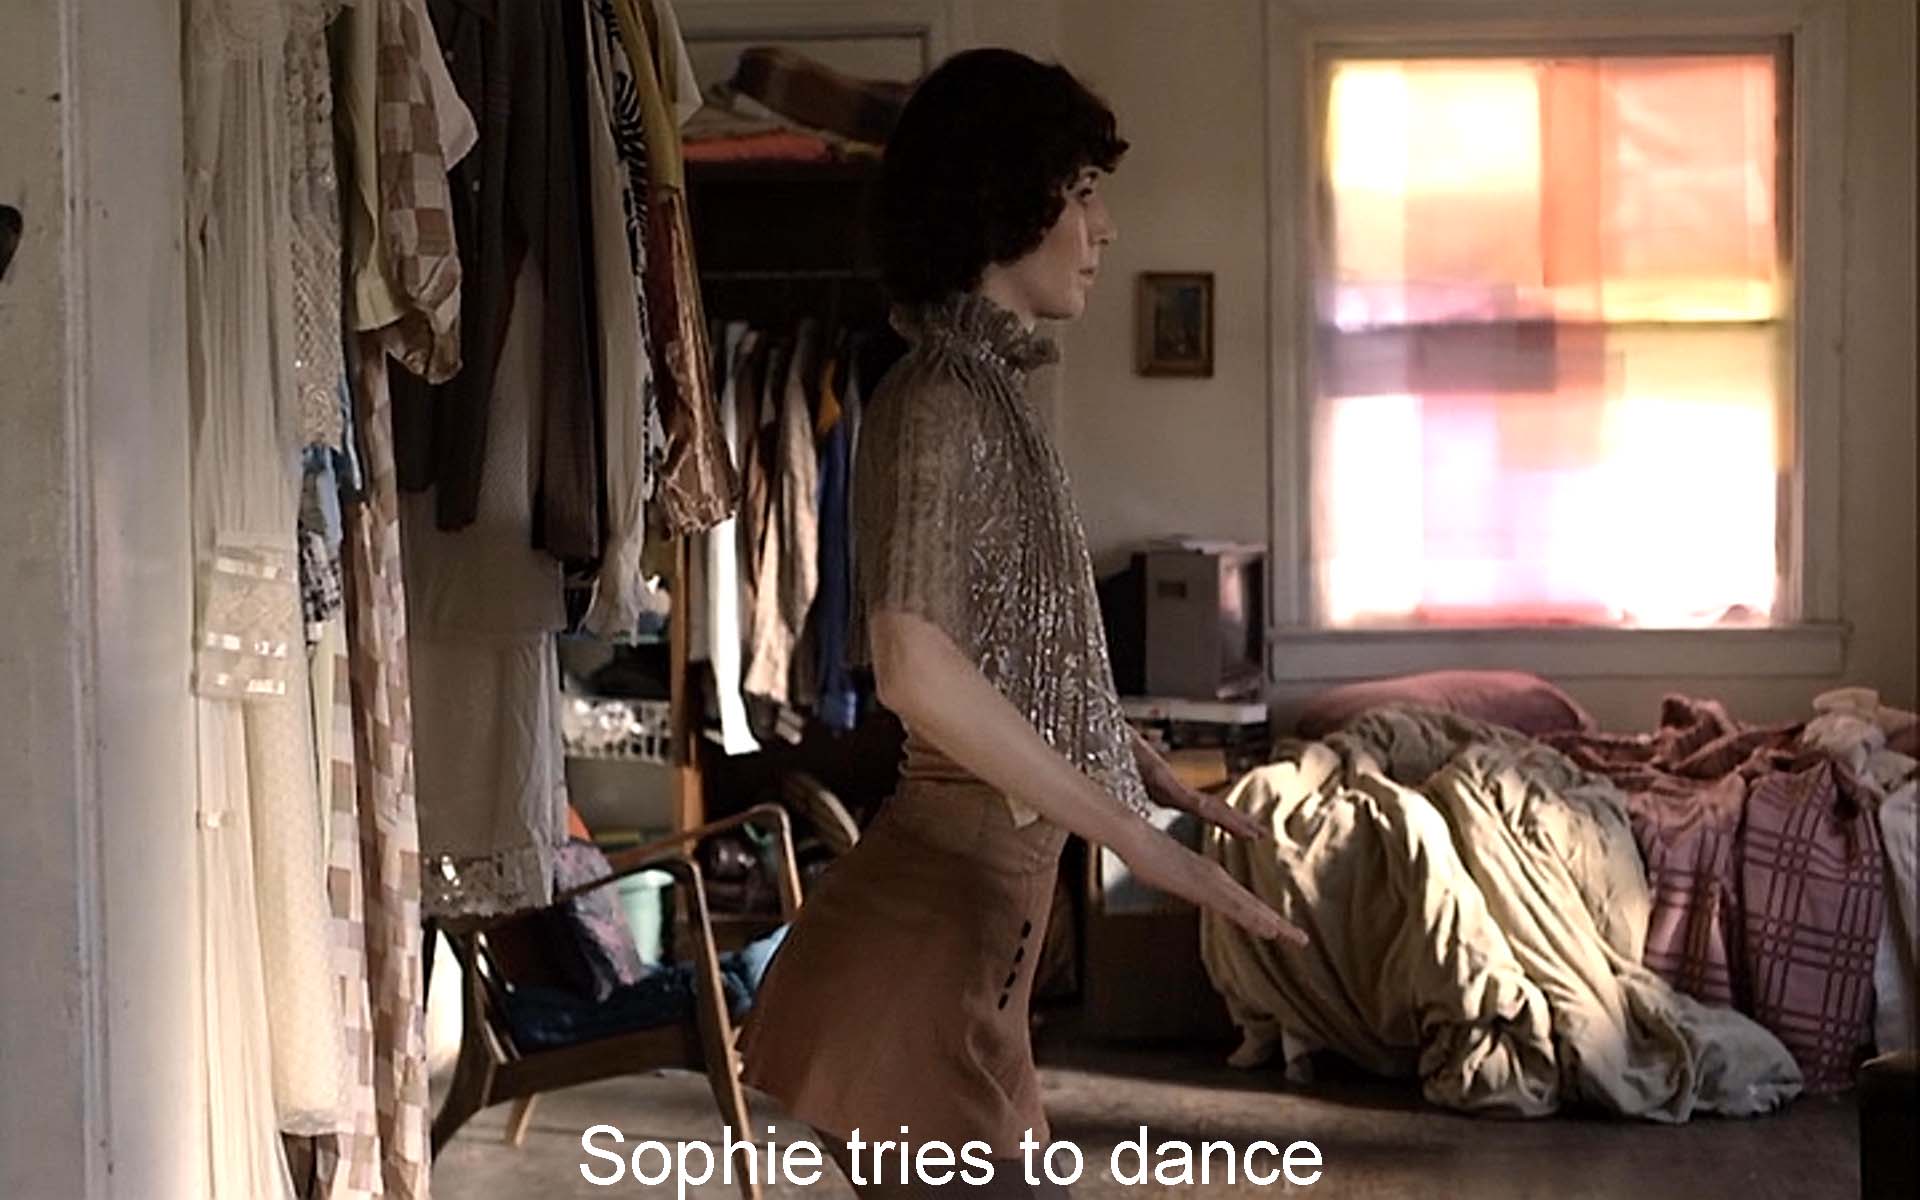 Sophie tries to dance